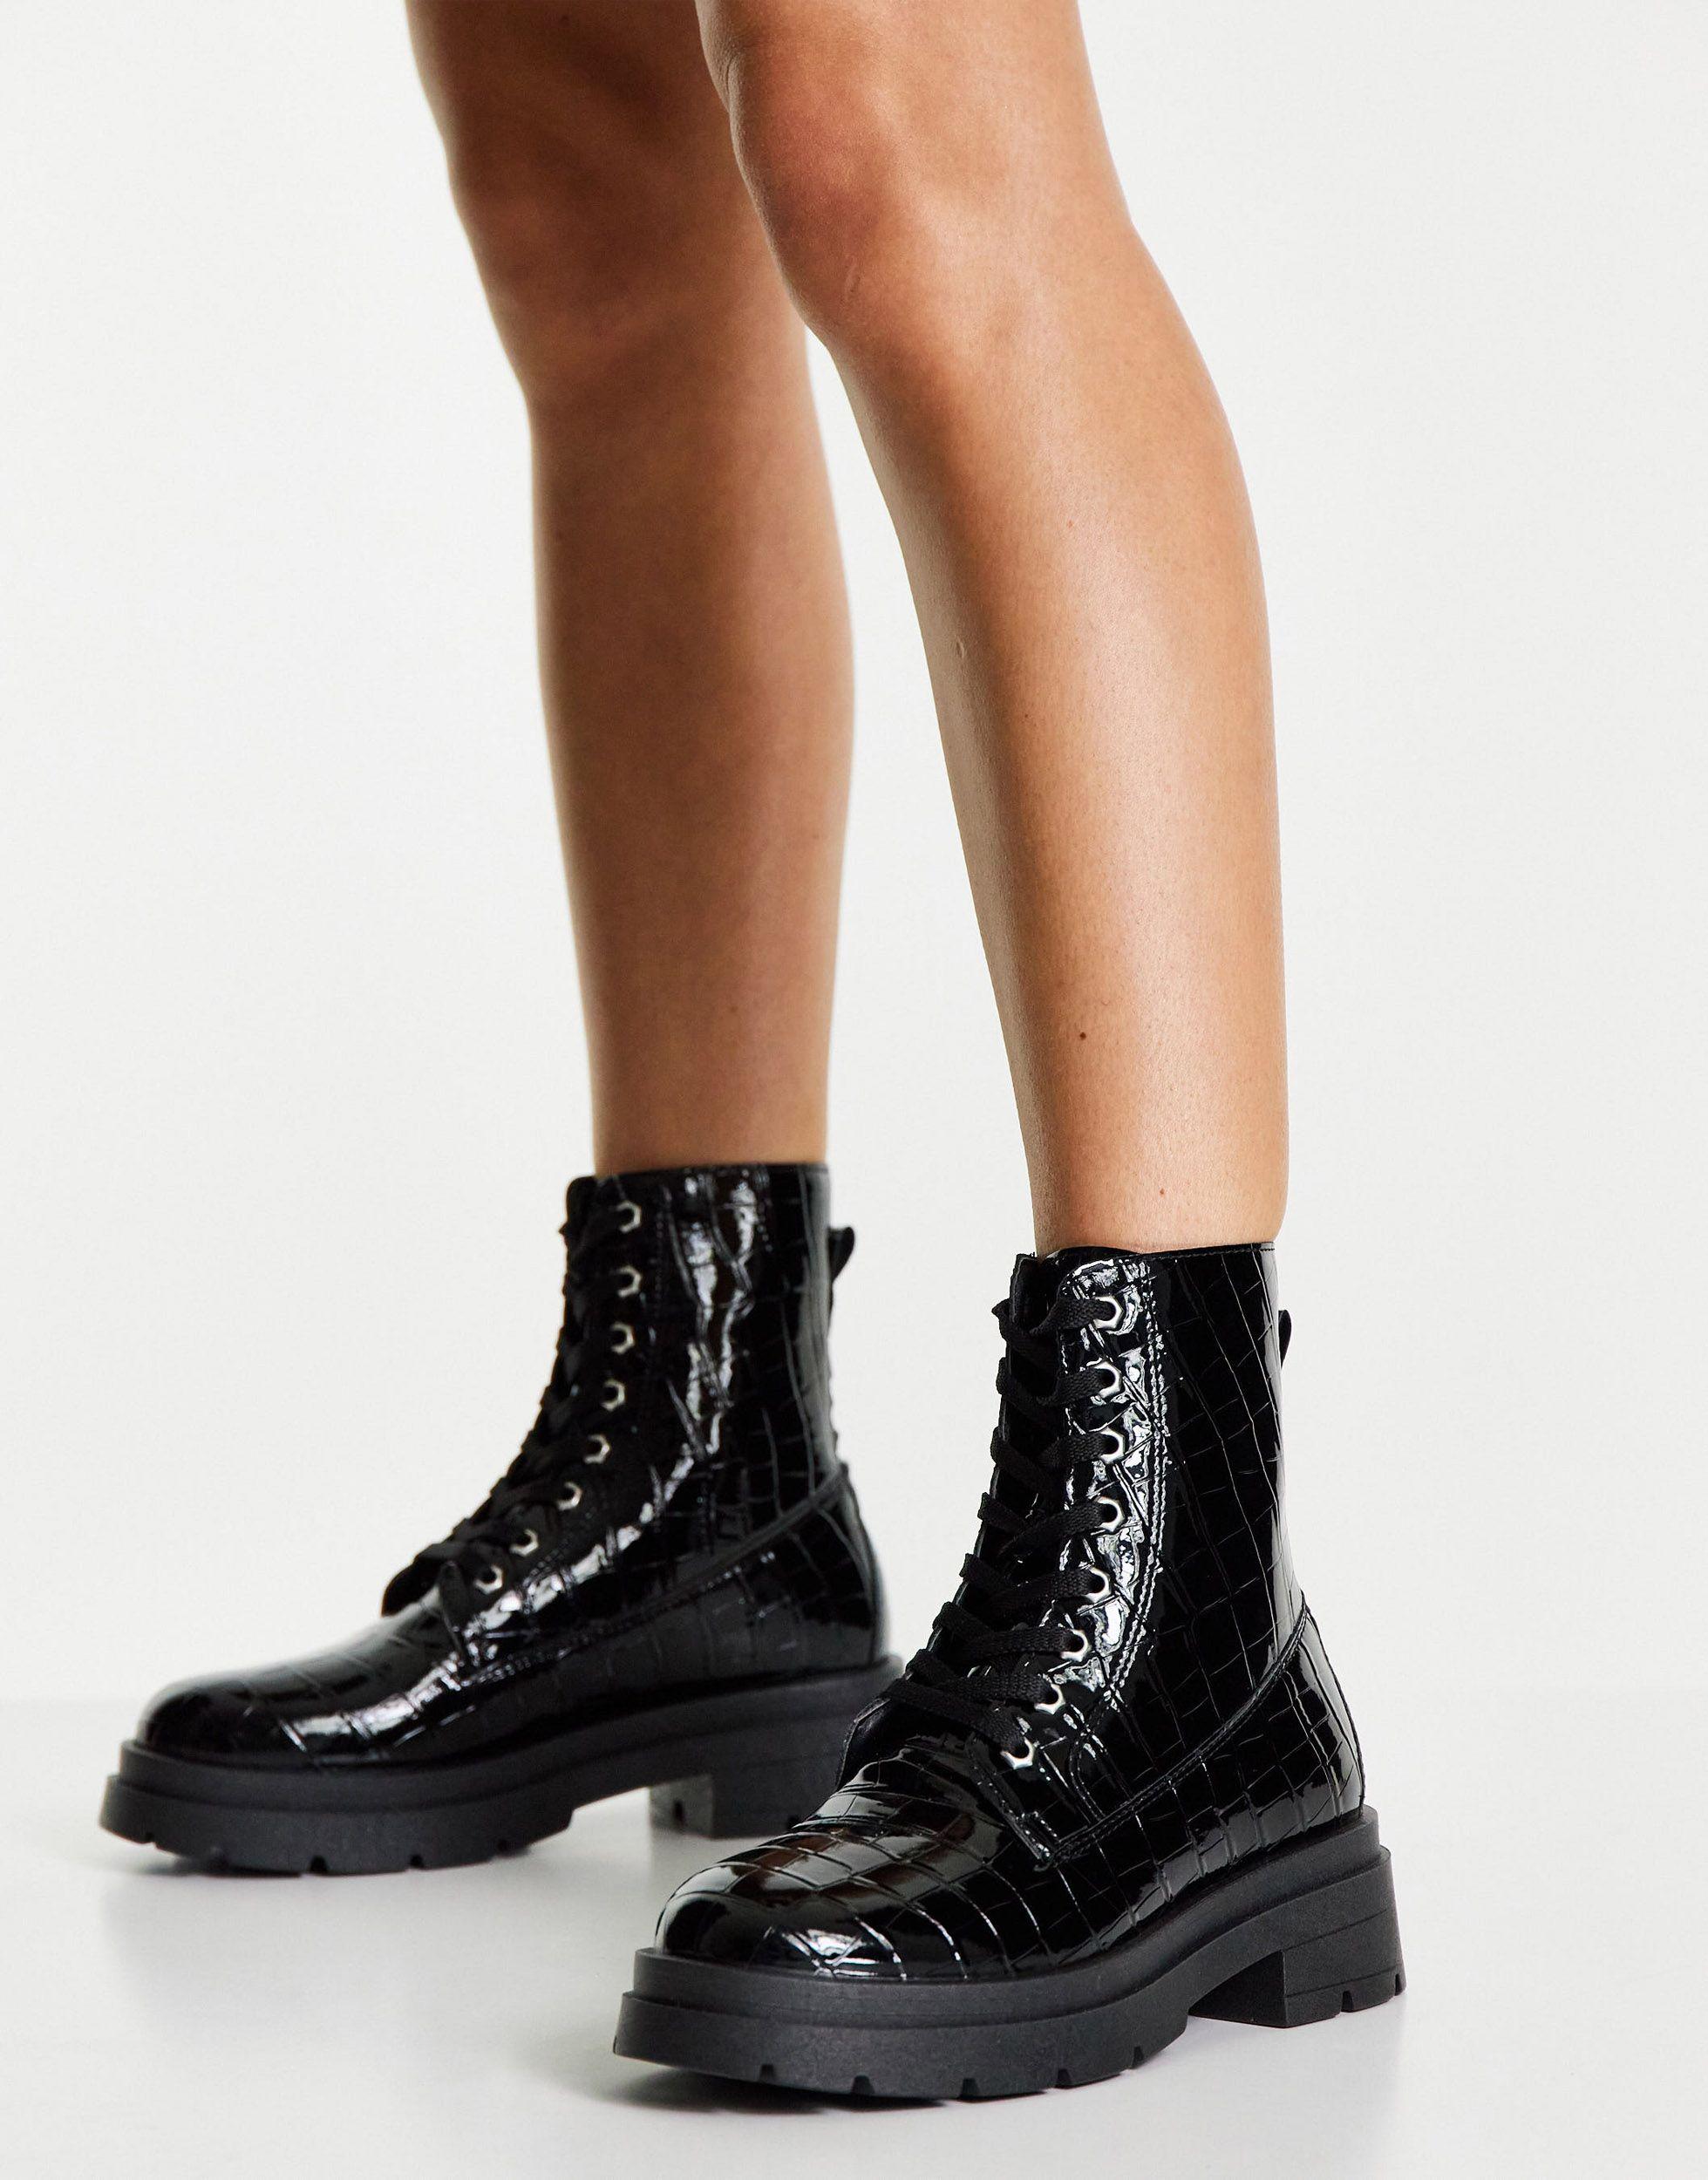 TOPSHOP Kali Lace Up Boot in Black | Lyst